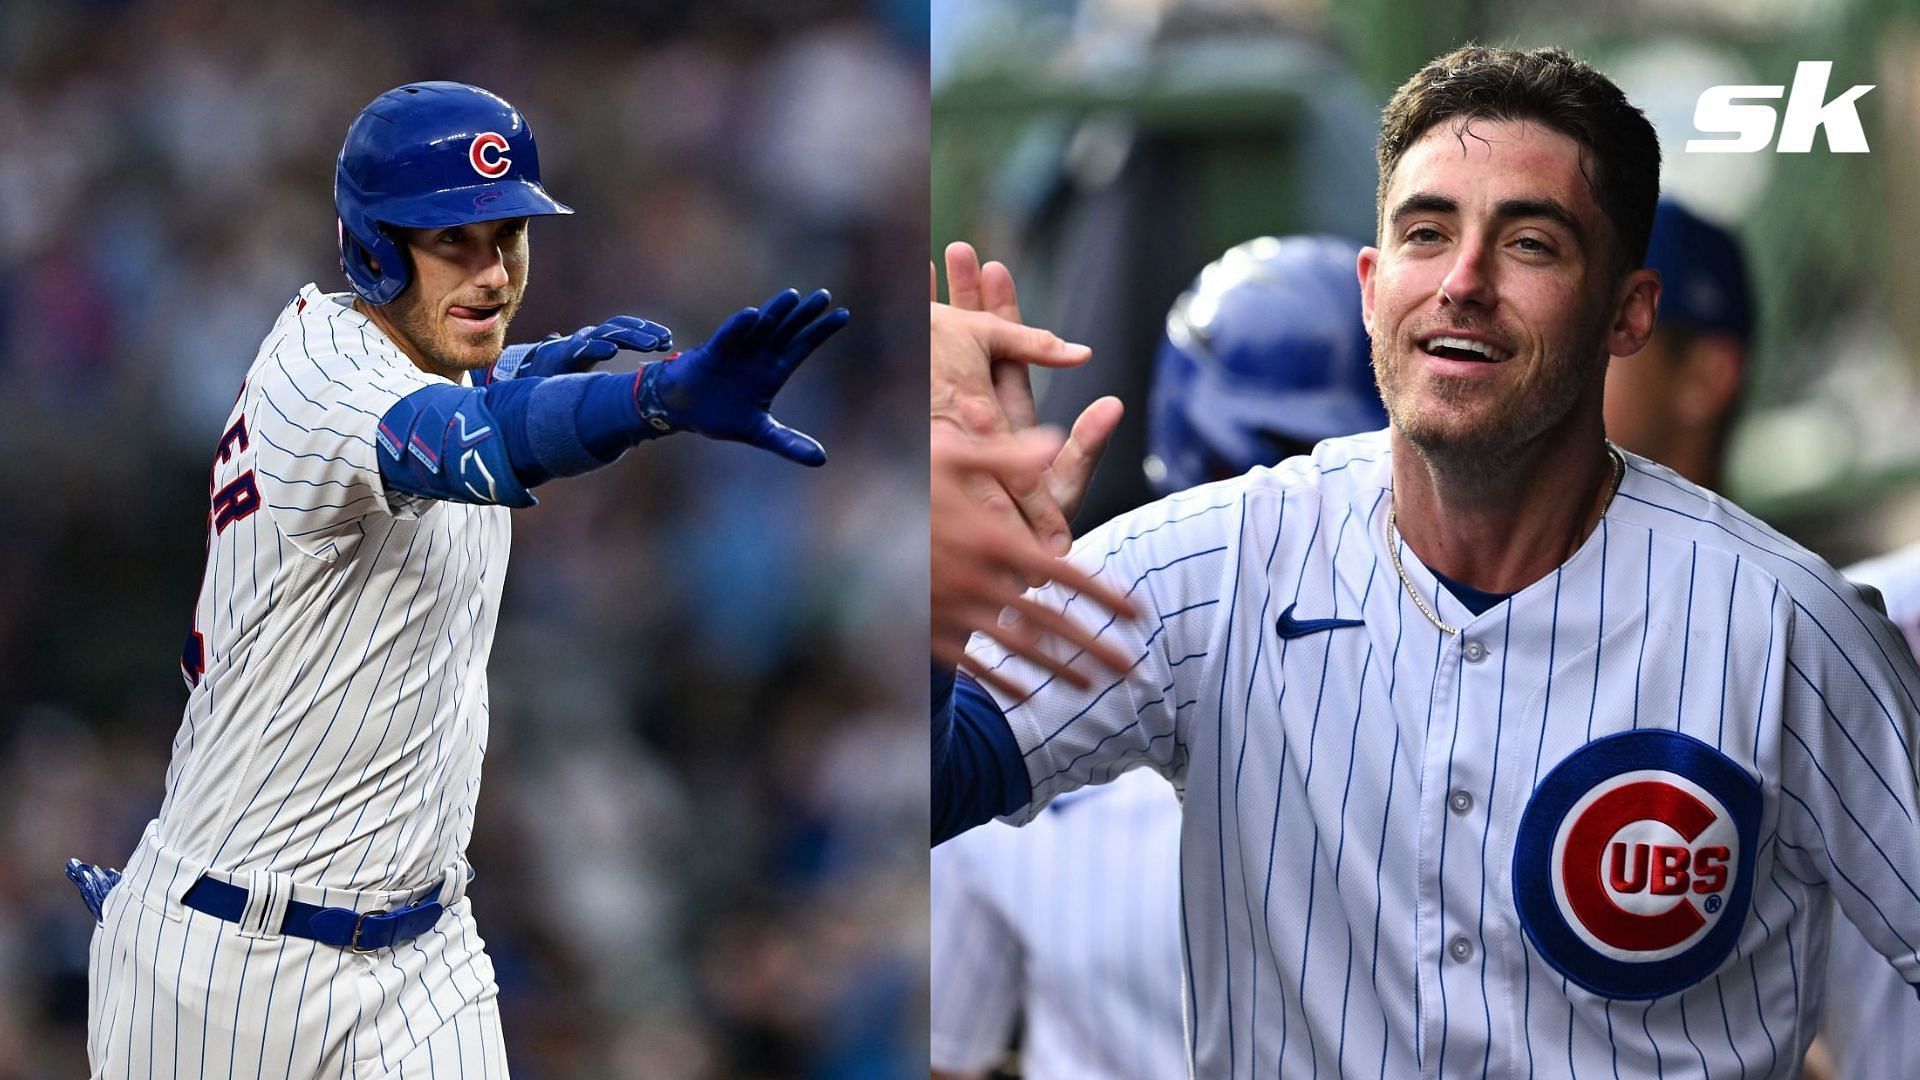 Google Bard believes that the New York Mets could try and sign Cody Bellinger this offseason